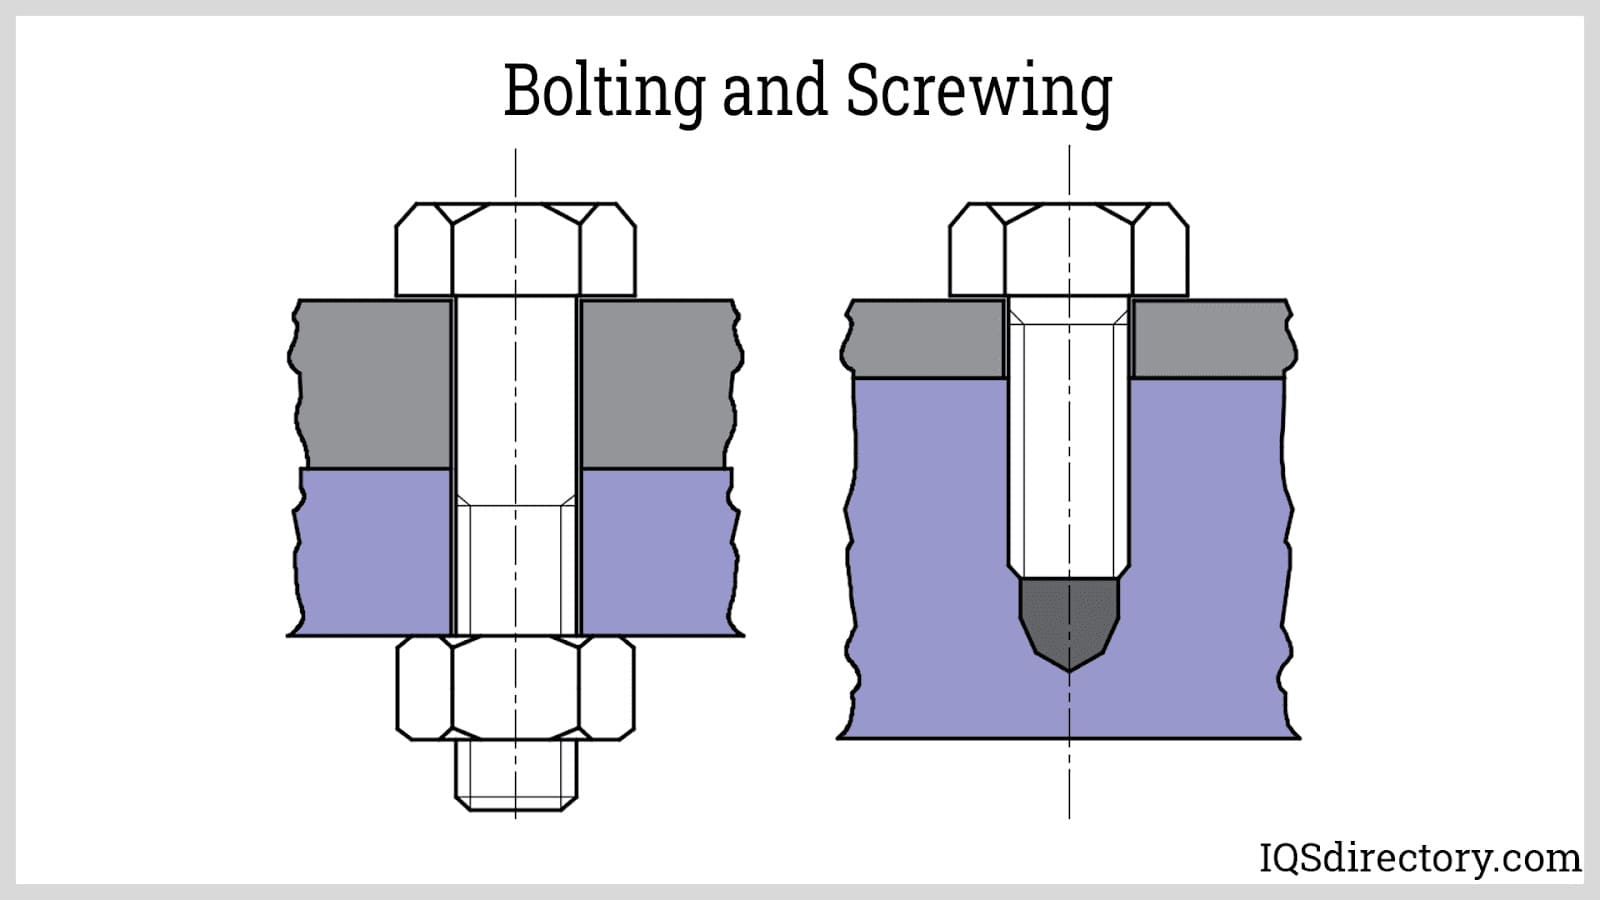 Bolting and Screwing